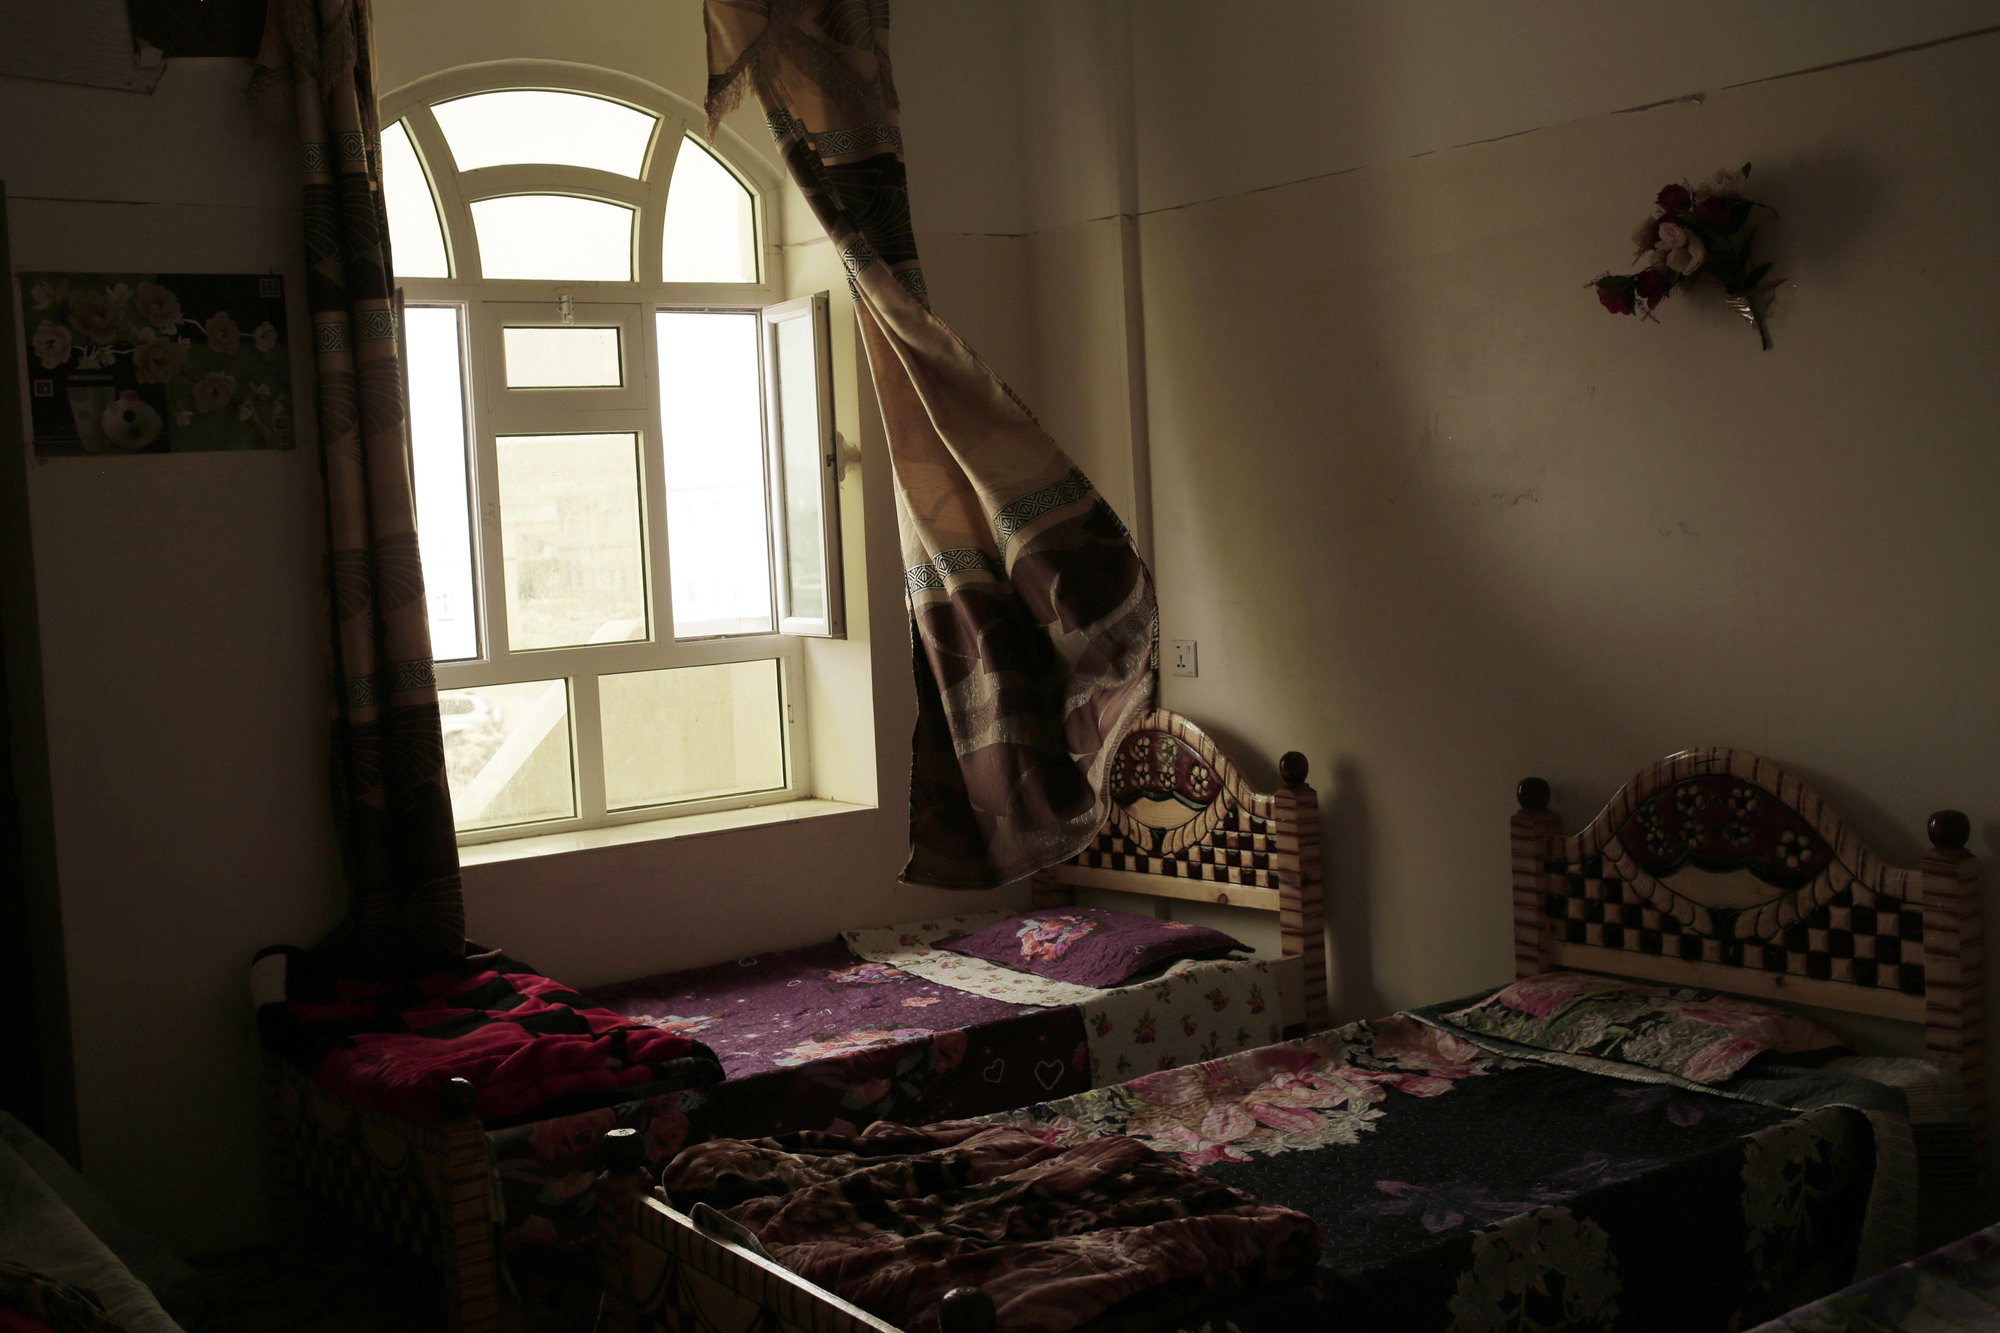 This July 28, 2018, photo shows a bedroom at the Rehabilitation Of Children Recruited and Impacted By War in Yemen Project center in Marib, Yemen. The Houthis have inducted 18,000 child soldiers into their rebel army since the beginning of the war in 2014, a senior Houthi military official acknowledged to The Associated Press. Image by Nariman El-Mofty / AP News. Yemen, 2018.